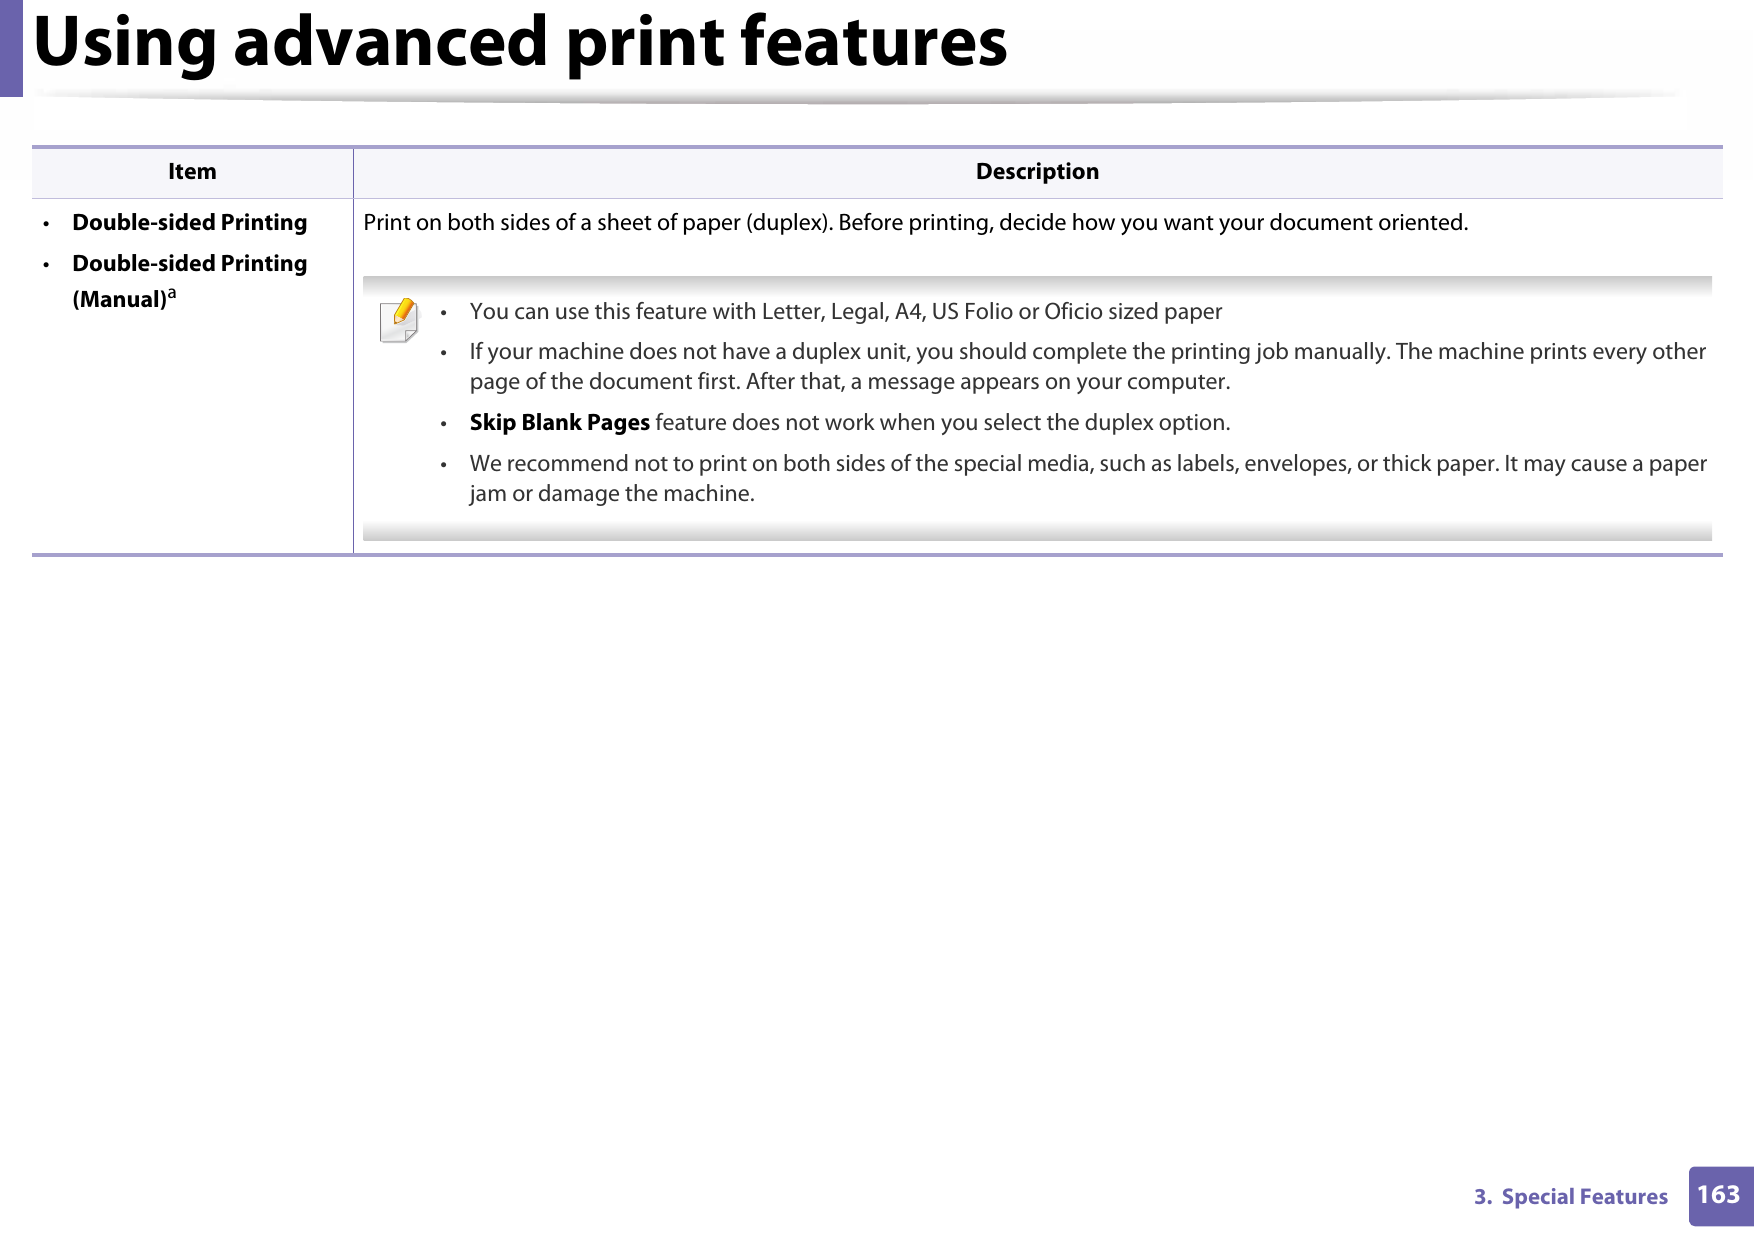 Using advanced print features1633.  Special Features•Double-sided Printing•Double-sided Printing (Manual)aPrint on both sides of a sheet of paper (duplex). Before printing, decide how you want your document oriented.  • You can use this feature with Letter, Legal, A4, US Folio or Oficio sized paper • If your machine does not have a duplex unit, you should complete the printing job manually. The machine prints every other page of the document first. After that, a message appears on your computer.•Skip Blank Pages feature does not work when you select the duplex option.• We recommend not to print on both sides of the special media, such as labels, envelopes, or thick paper. It may cause a paper jam or damage the machine. Item Description